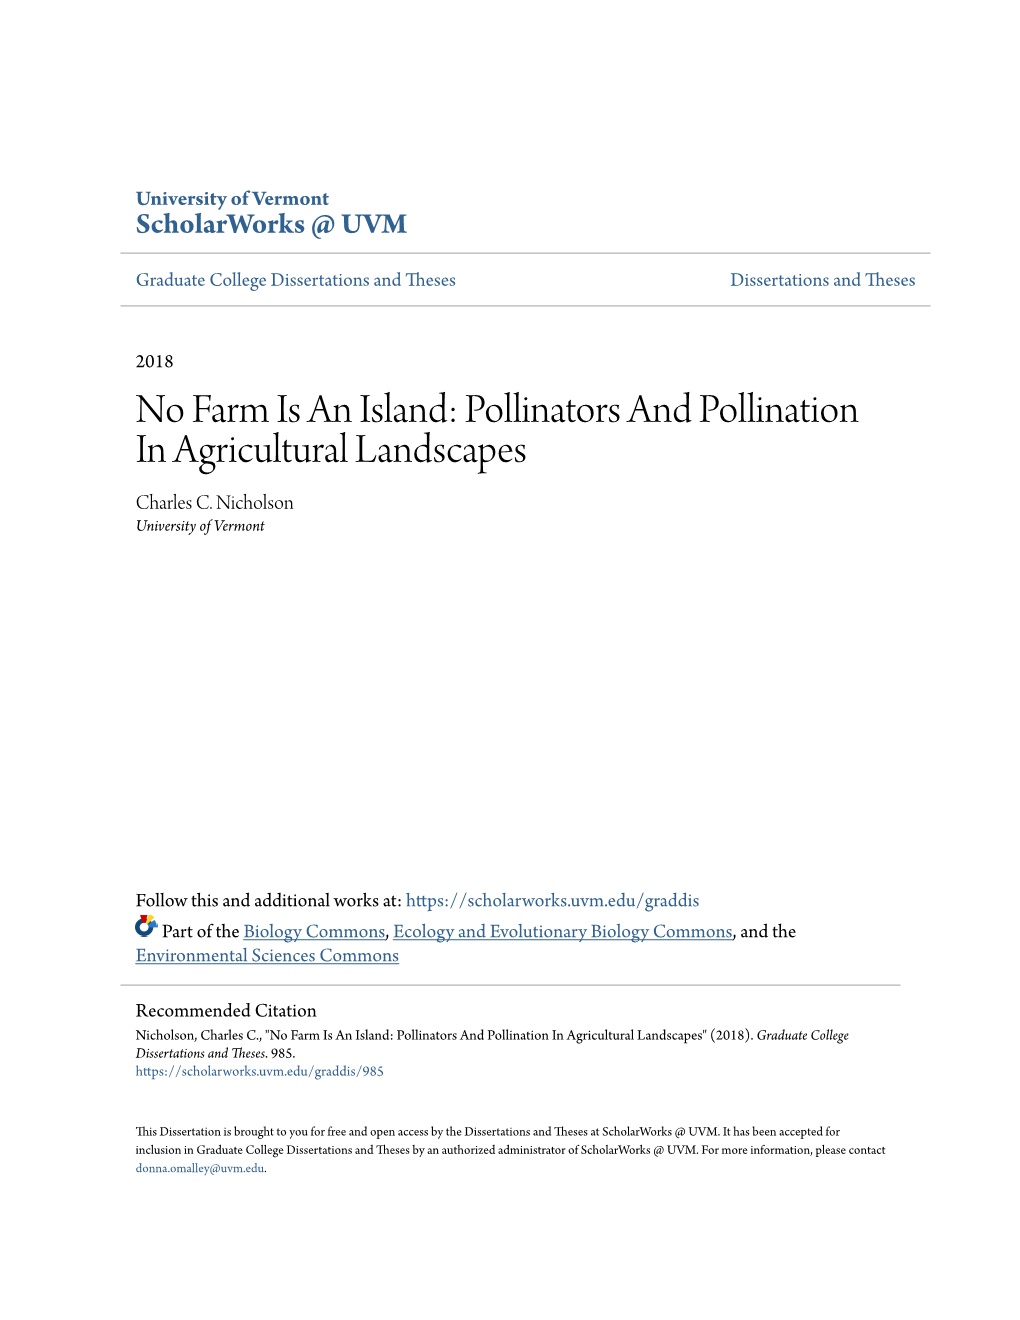 Pollinators and Pollination in Agricultural Landscapes Charles C